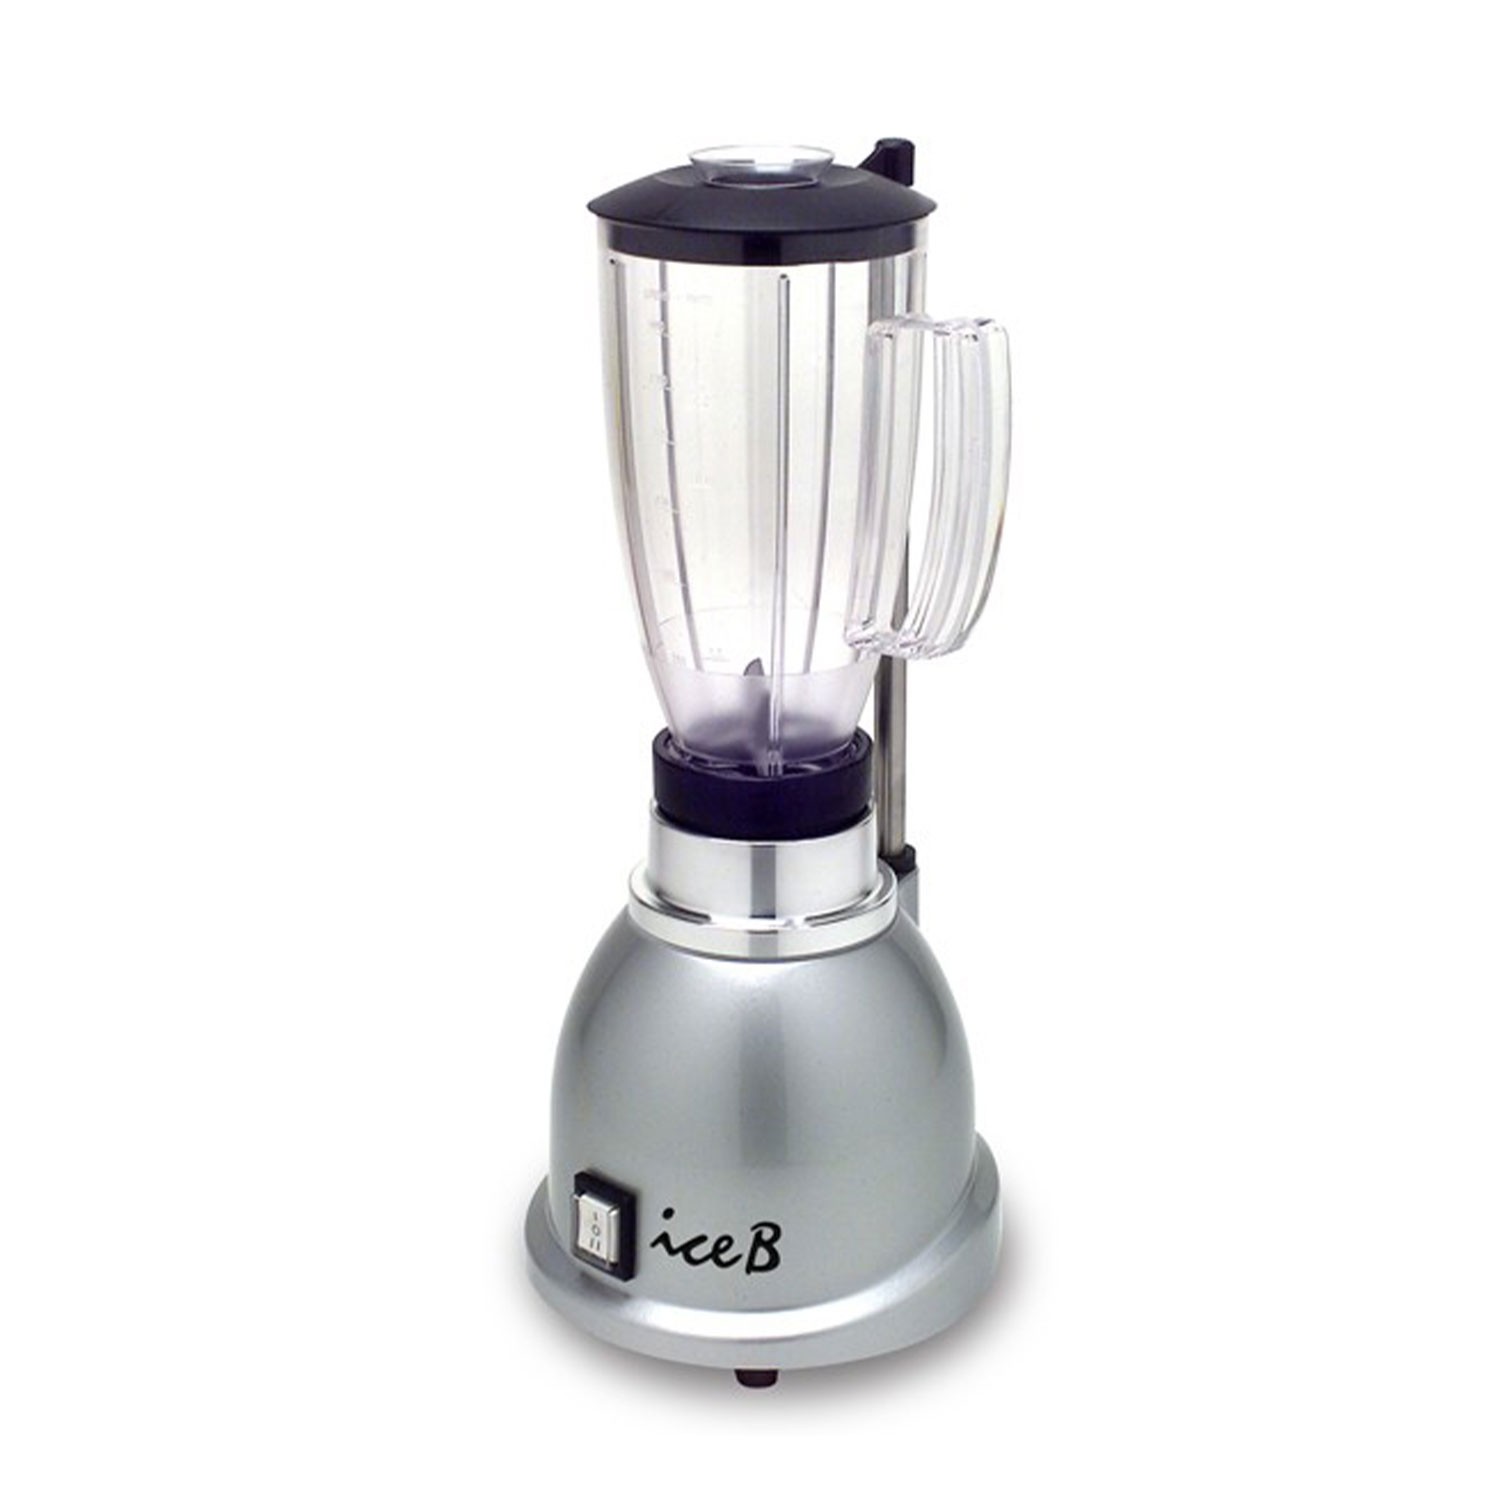 Incredible stand out catch Blender gheata, pahar plastic, capacitate 1.5 litri, putere 400 W